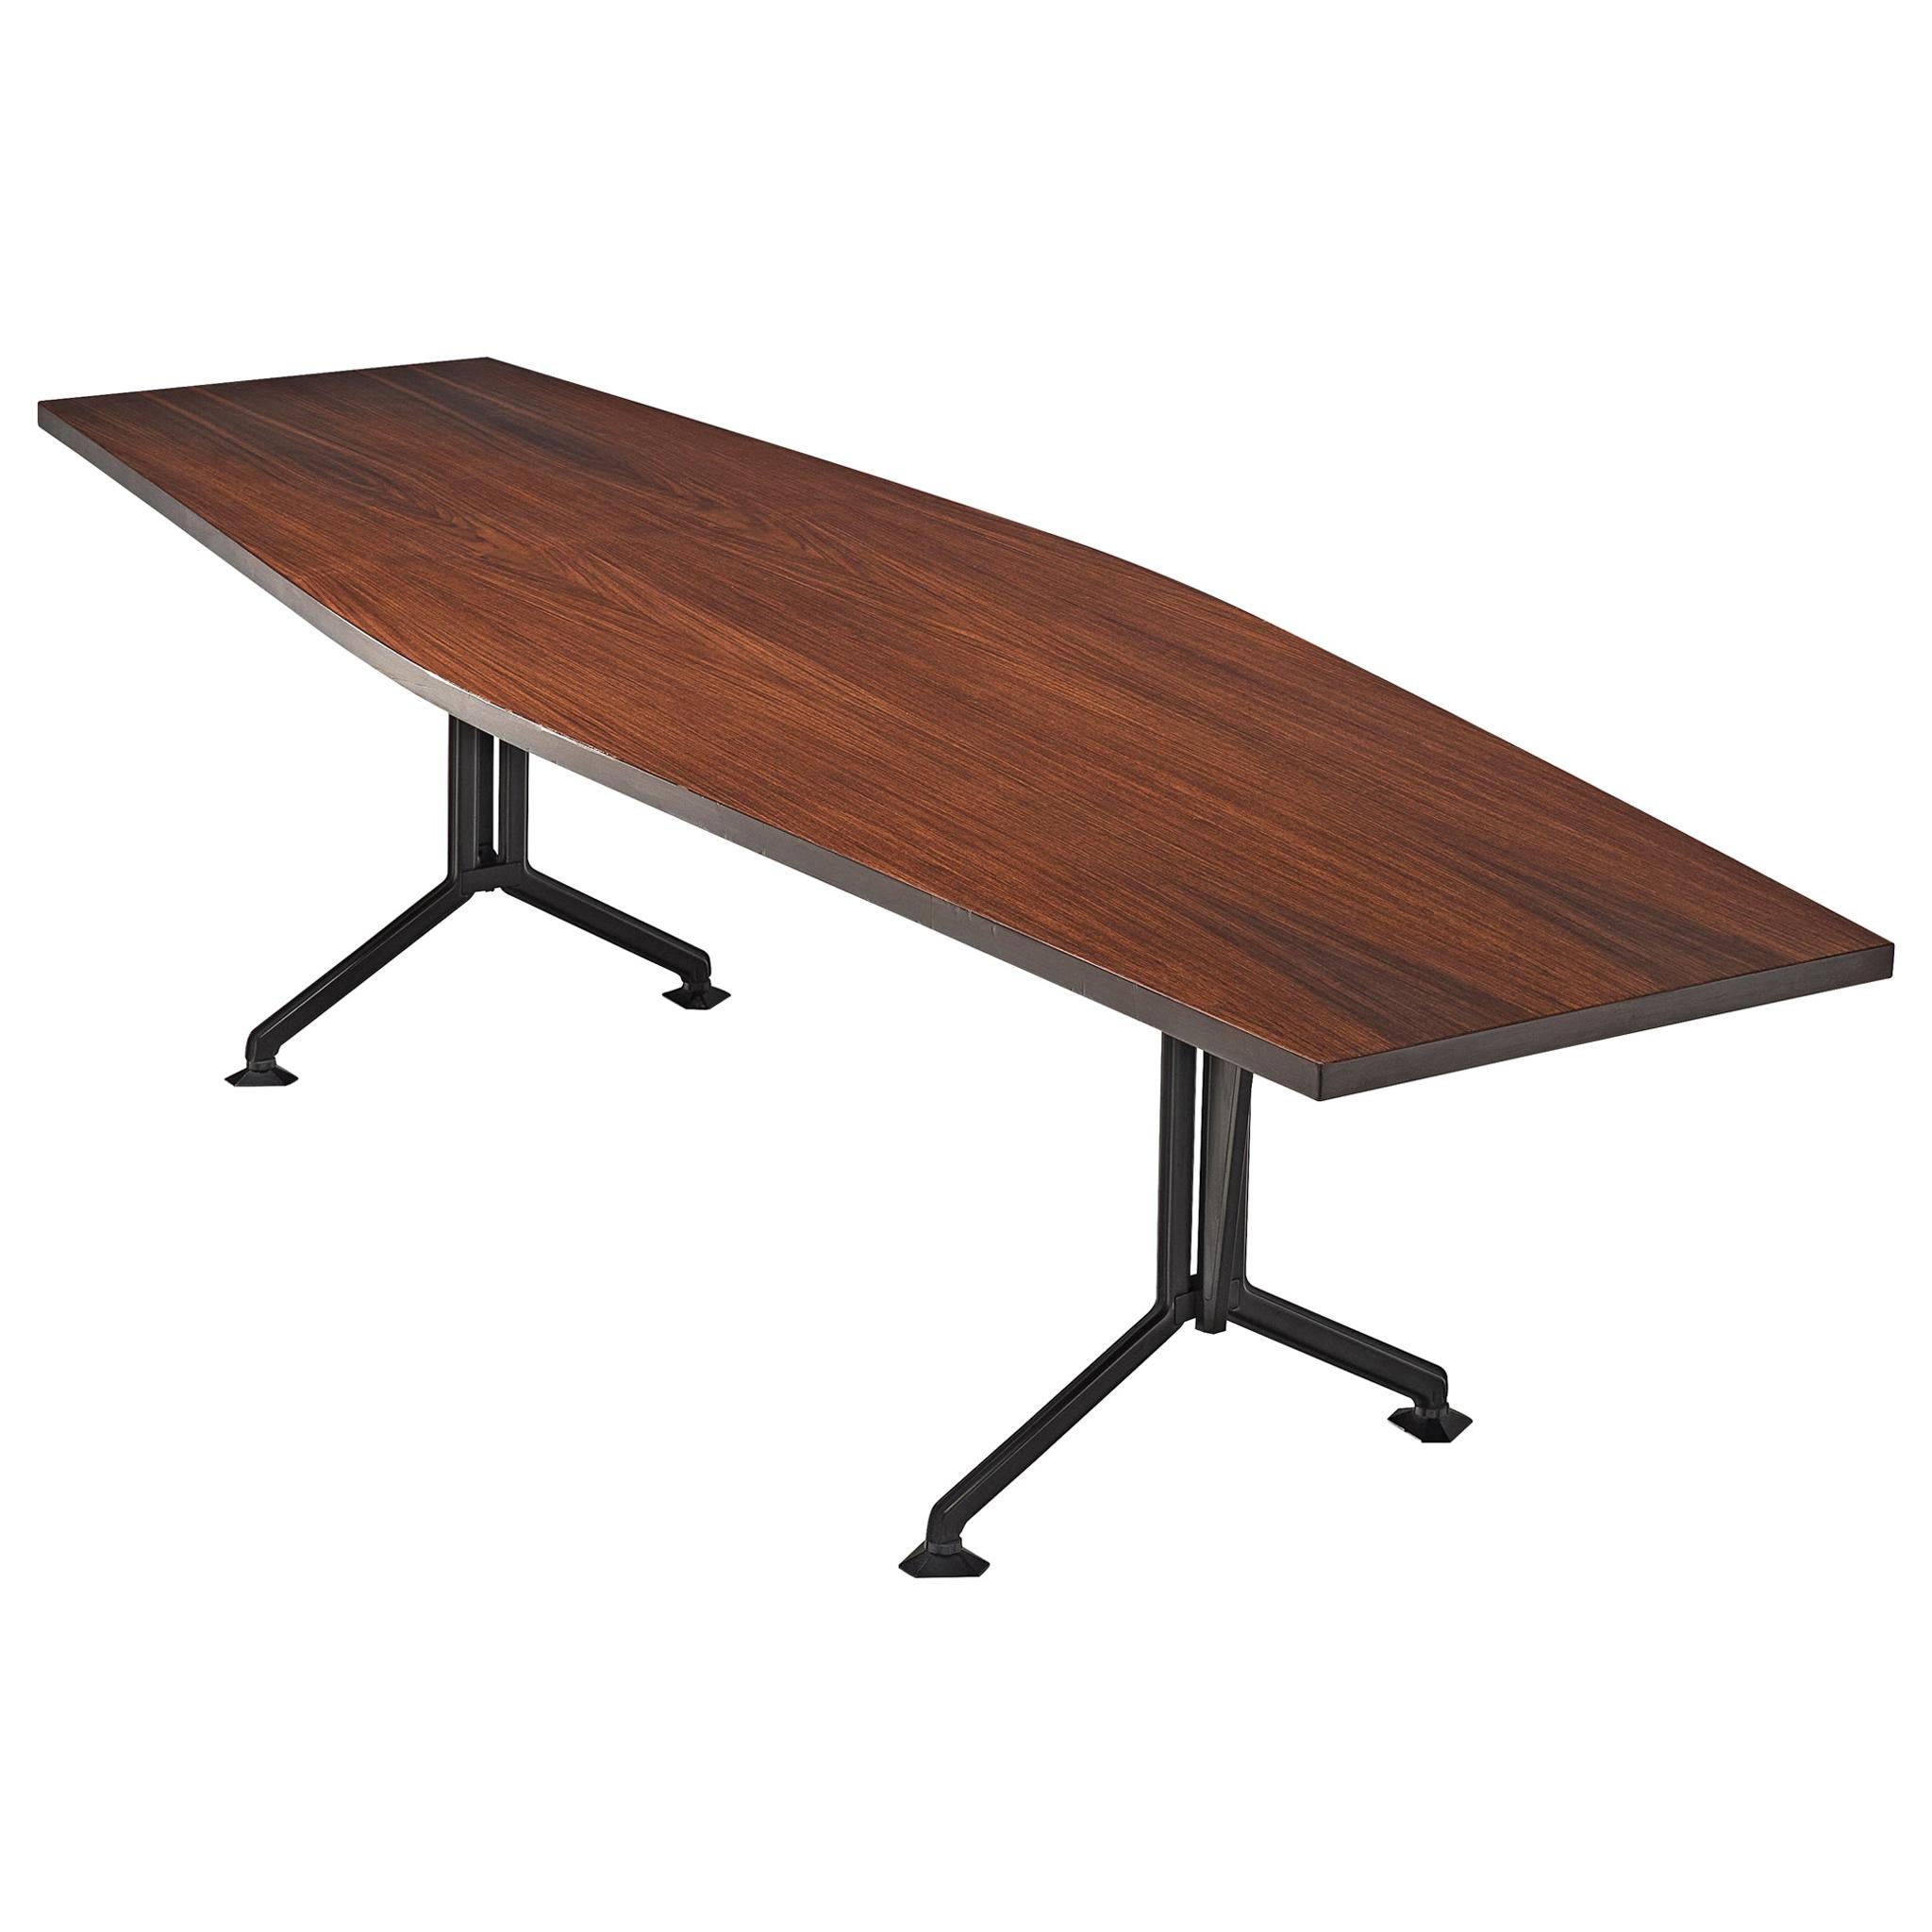 Studio BBPR 'Arco' Conference Table in Rosewood